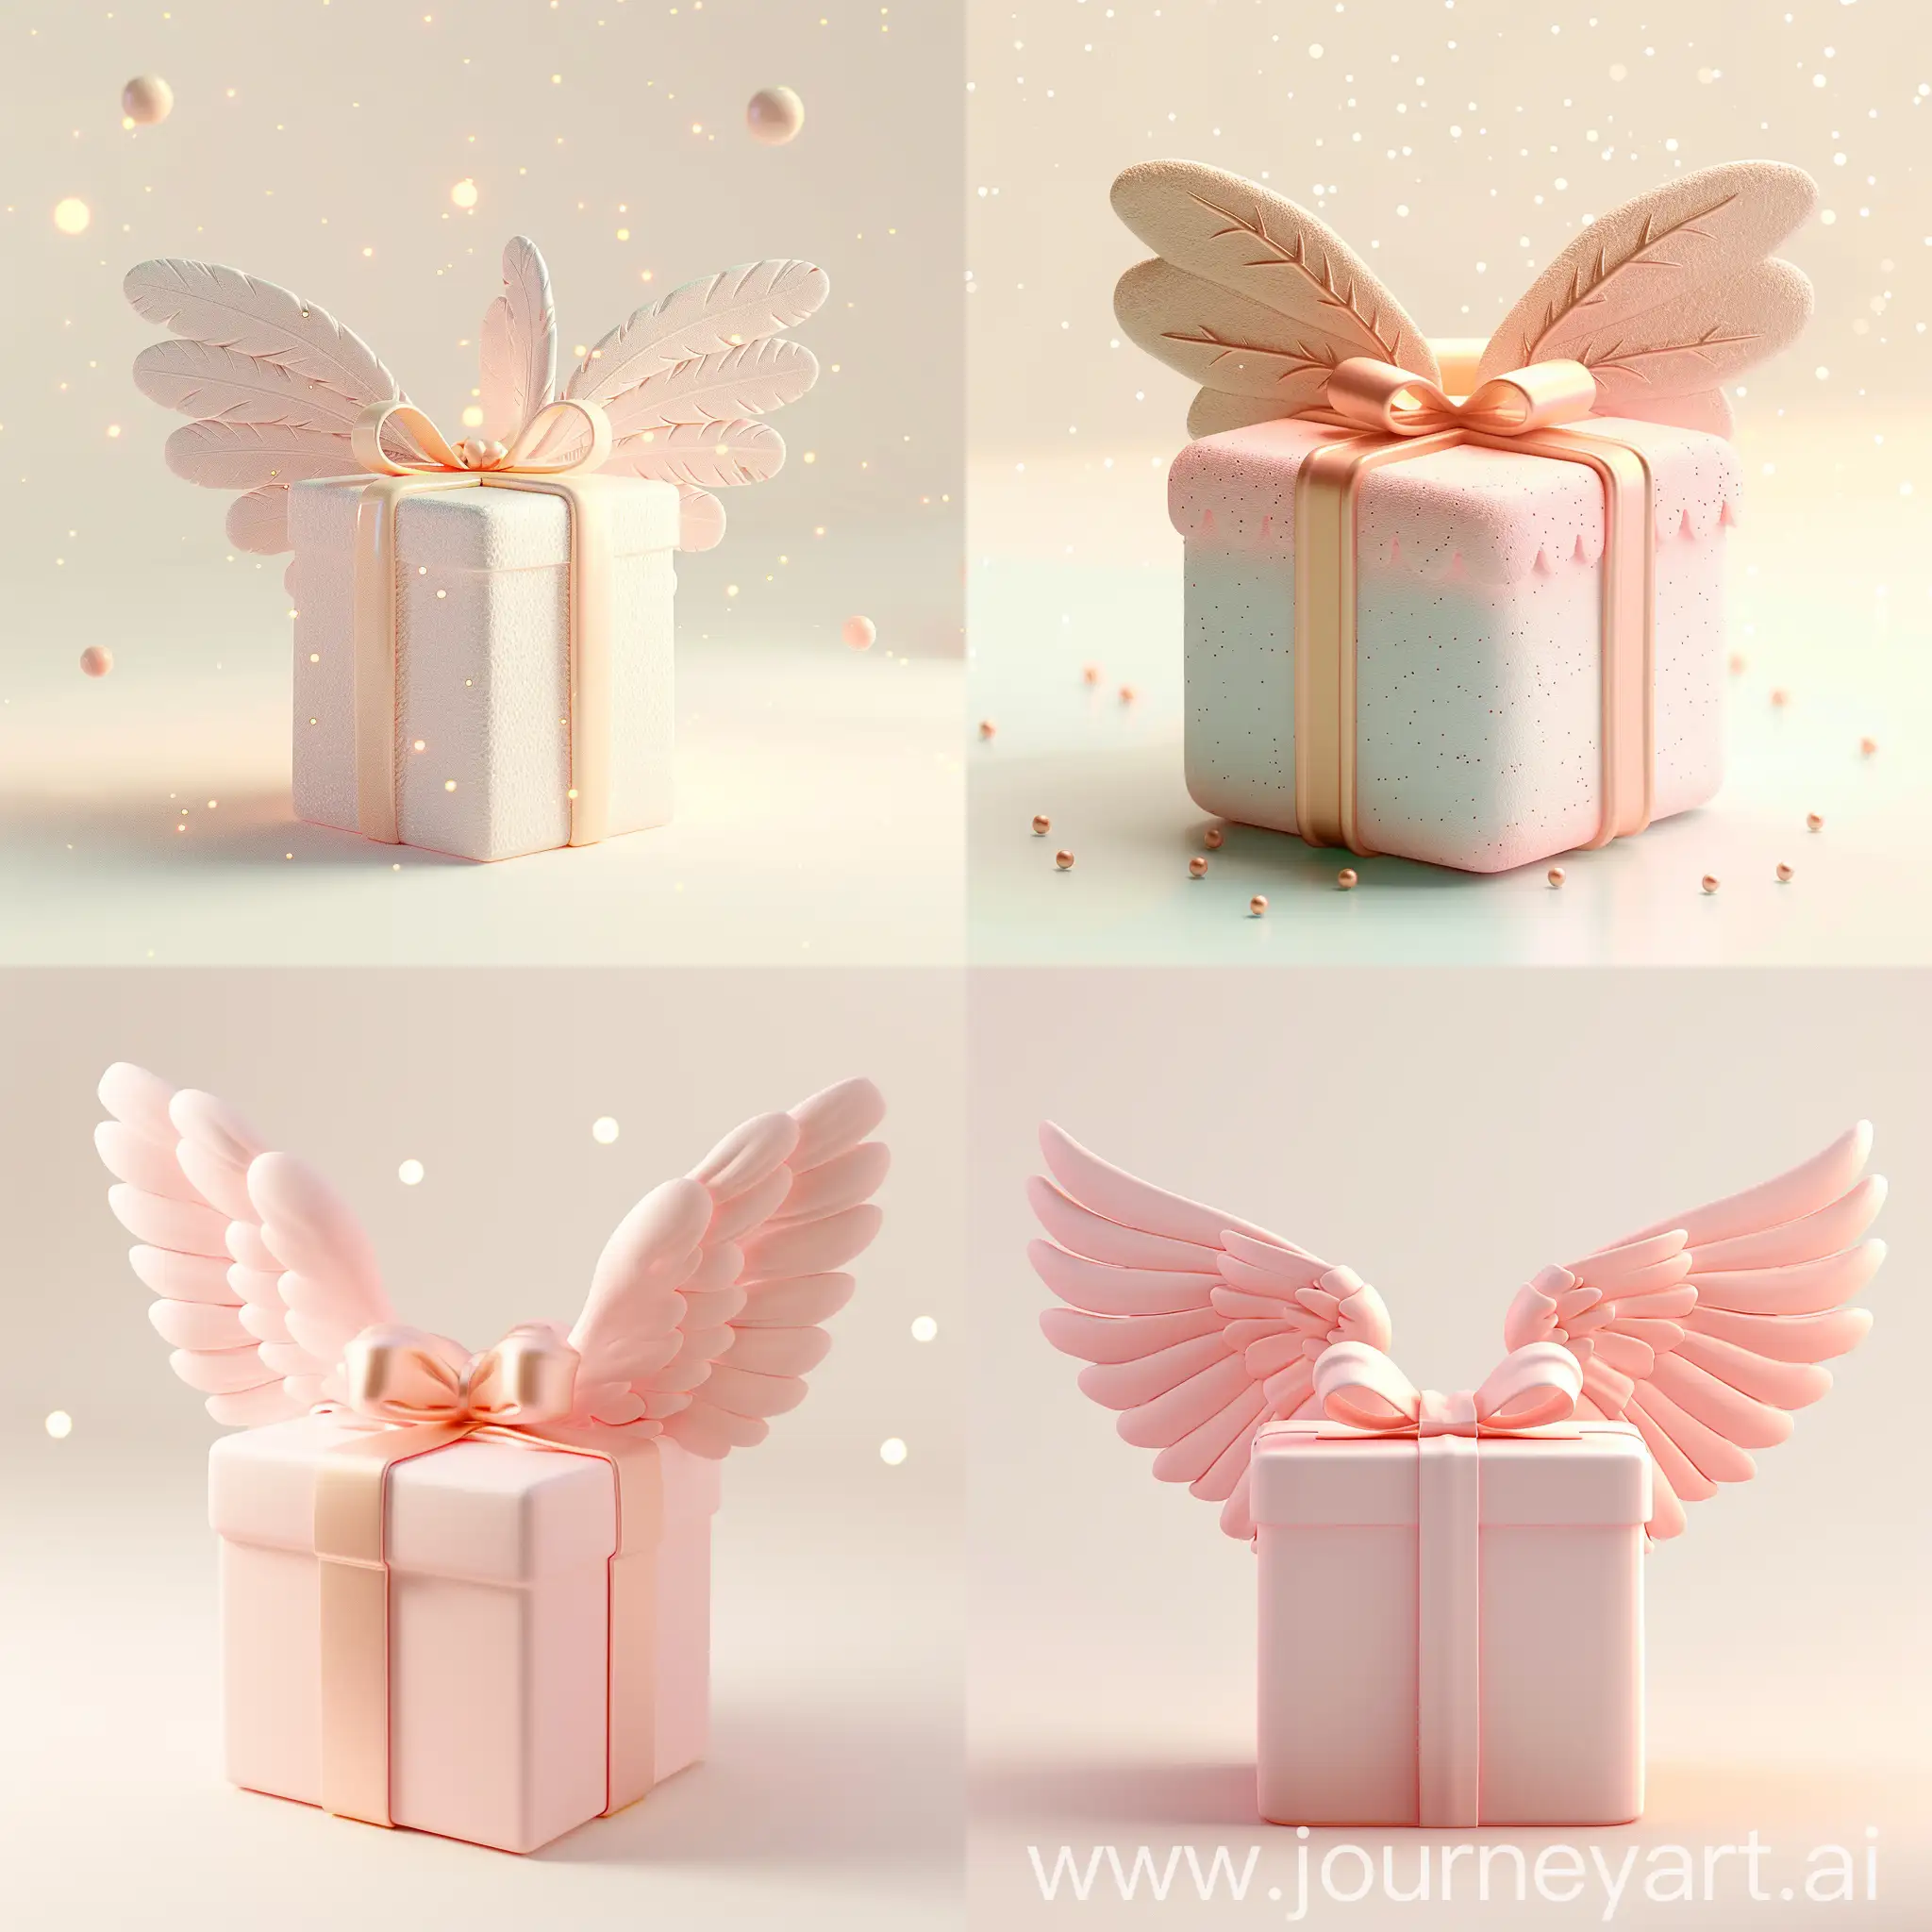 Cartoon-3D-Clay-Gift-Box-with-Wings-in-Pastel-Colors